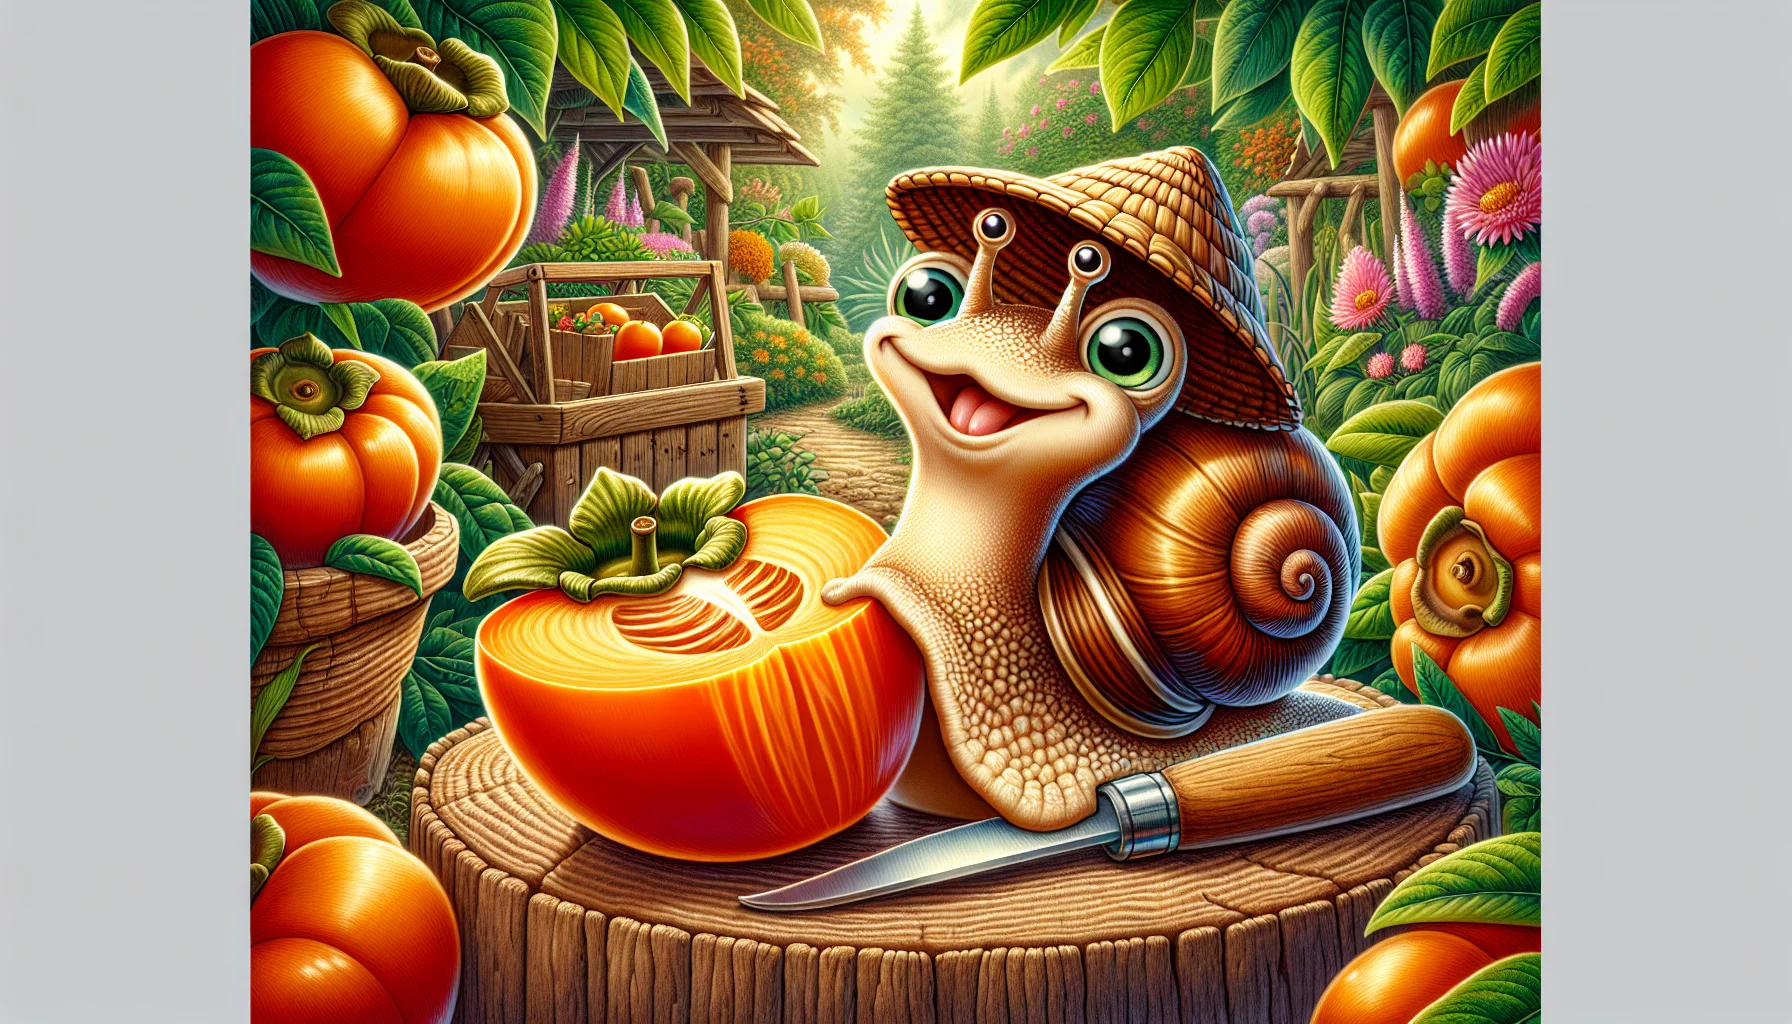 Create a humerous and detailed image of a gardening scenario. Depict a snail with a quirky expression wearing a tiny gardener hat. In front of the amused snail, set a ripe, glossy Hachiya persimmon on a wooden log. Show the fruit sliced open showcasing the pulpy interior. Add a tiny knife next to the fruit hinting that the snail is about to enjoy it. Surround this main scene with various plants and flowers native to a luscious garden. Use warm, inviting colors that entice people to engage in gardening.